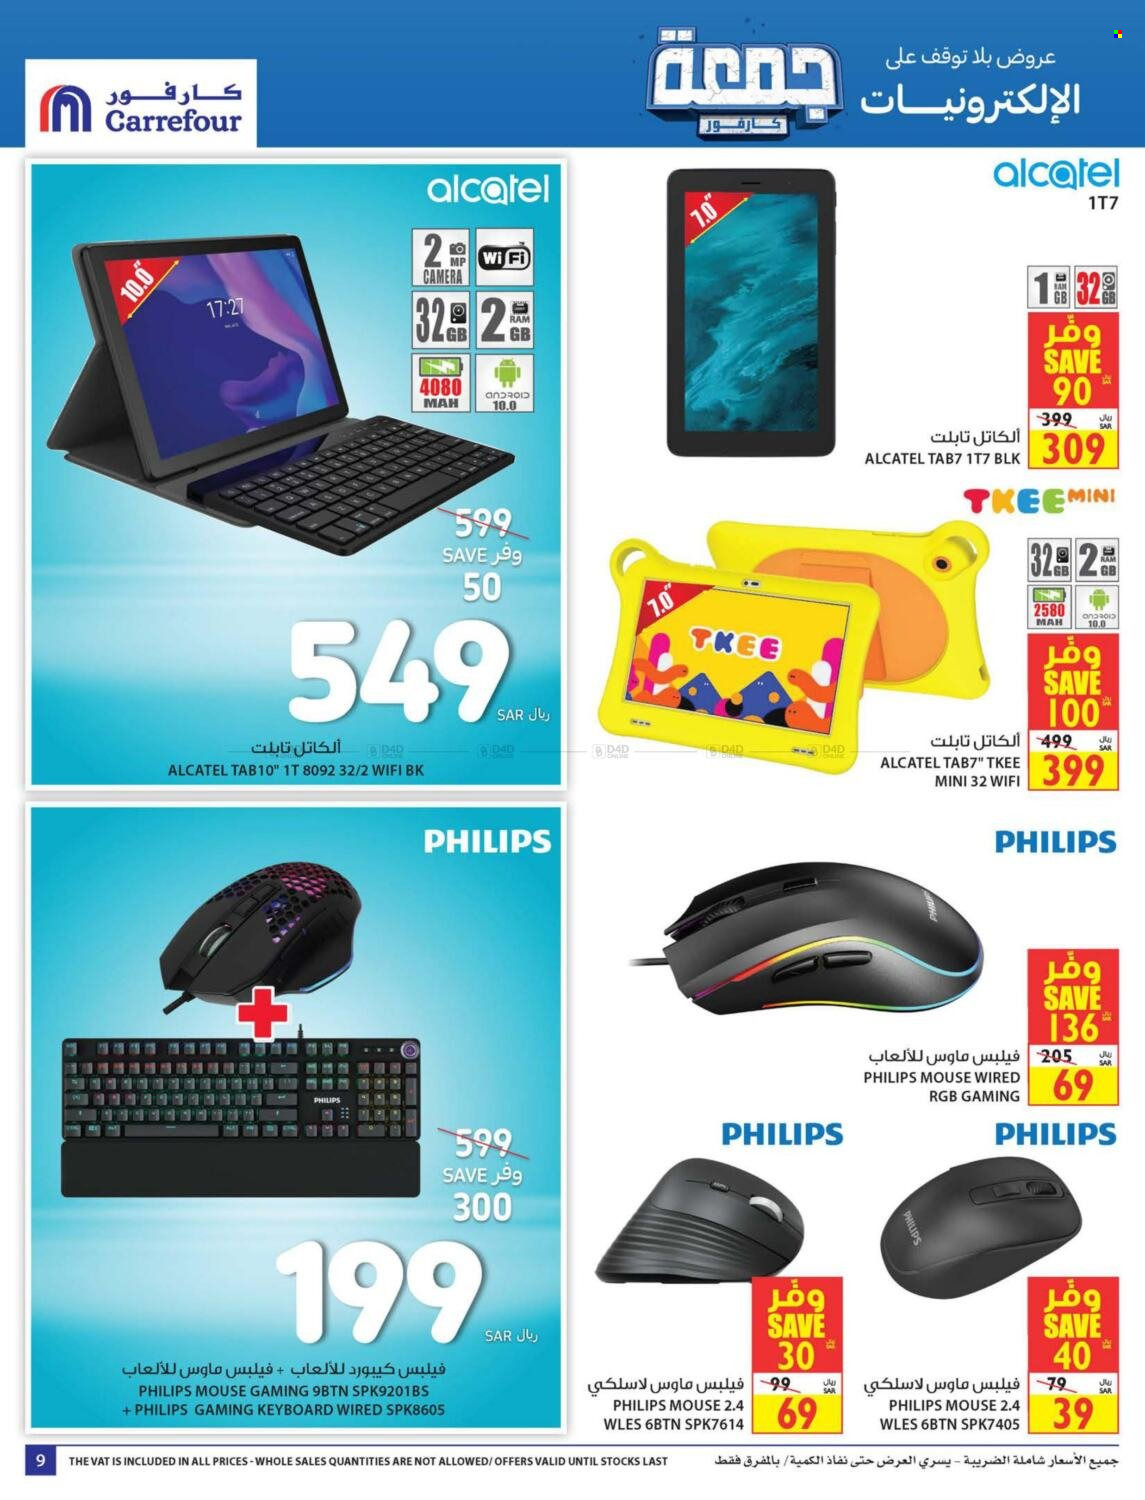 Carrefour flyer  - 10.28.2021 - 11.23.2021. Page 9.